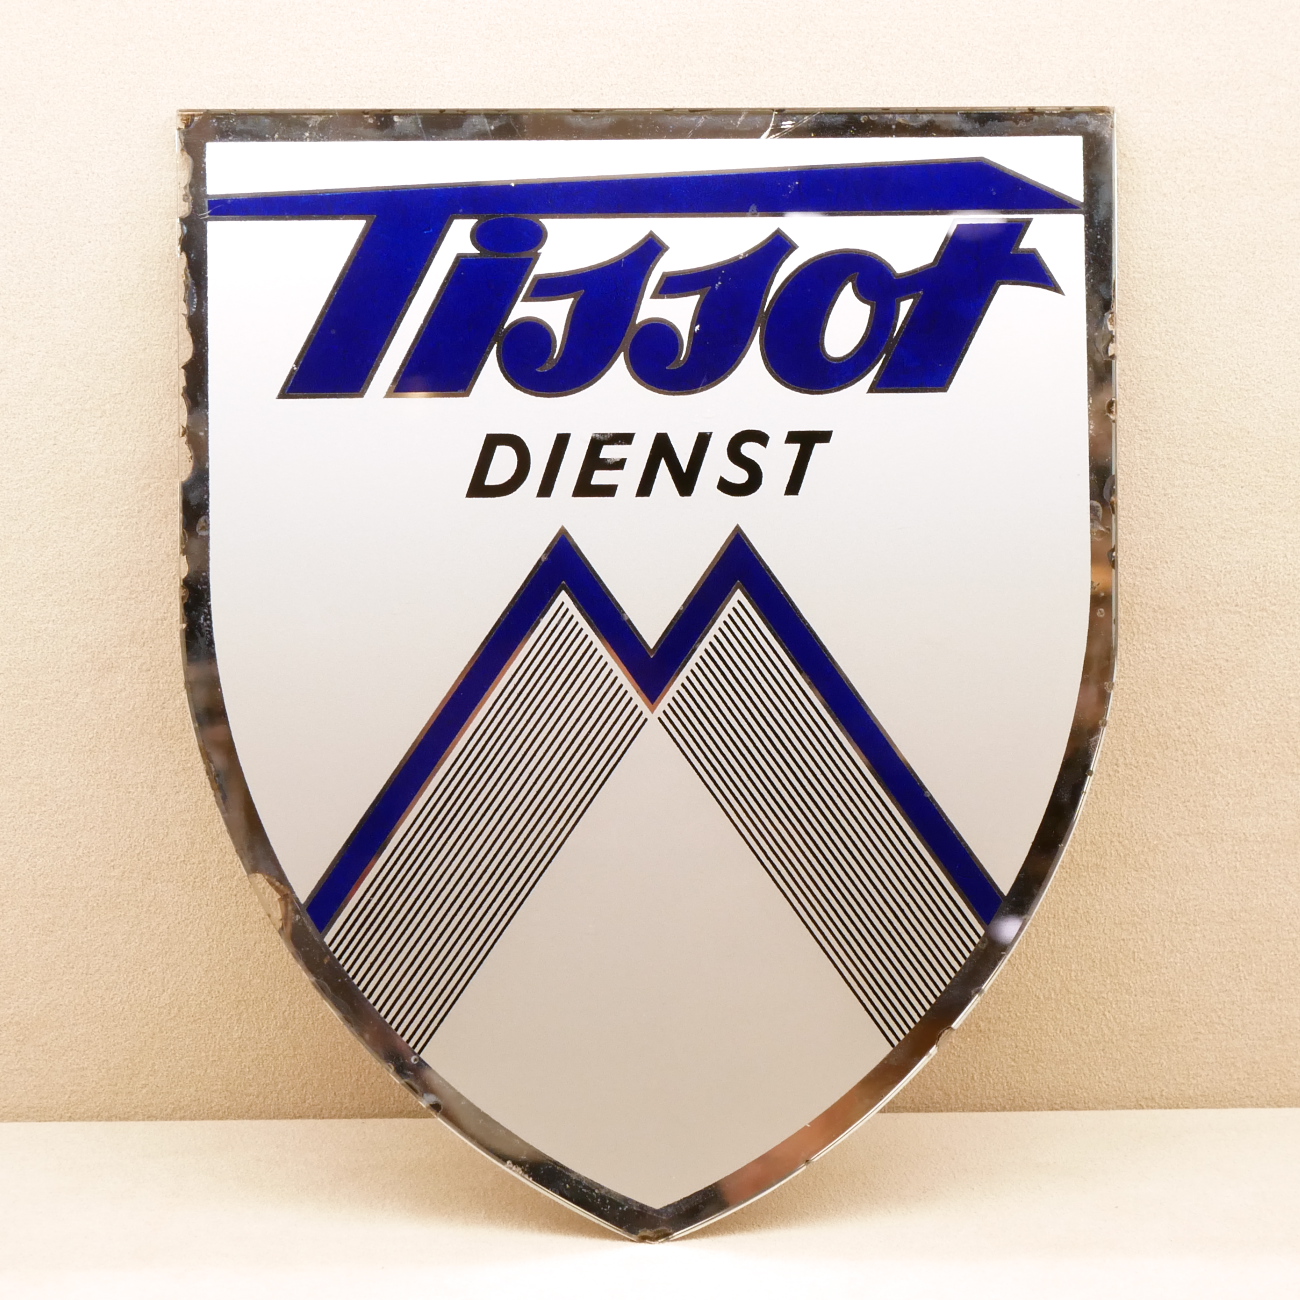 WATCH CASE & OTHER TISSOT SIGN BOARD